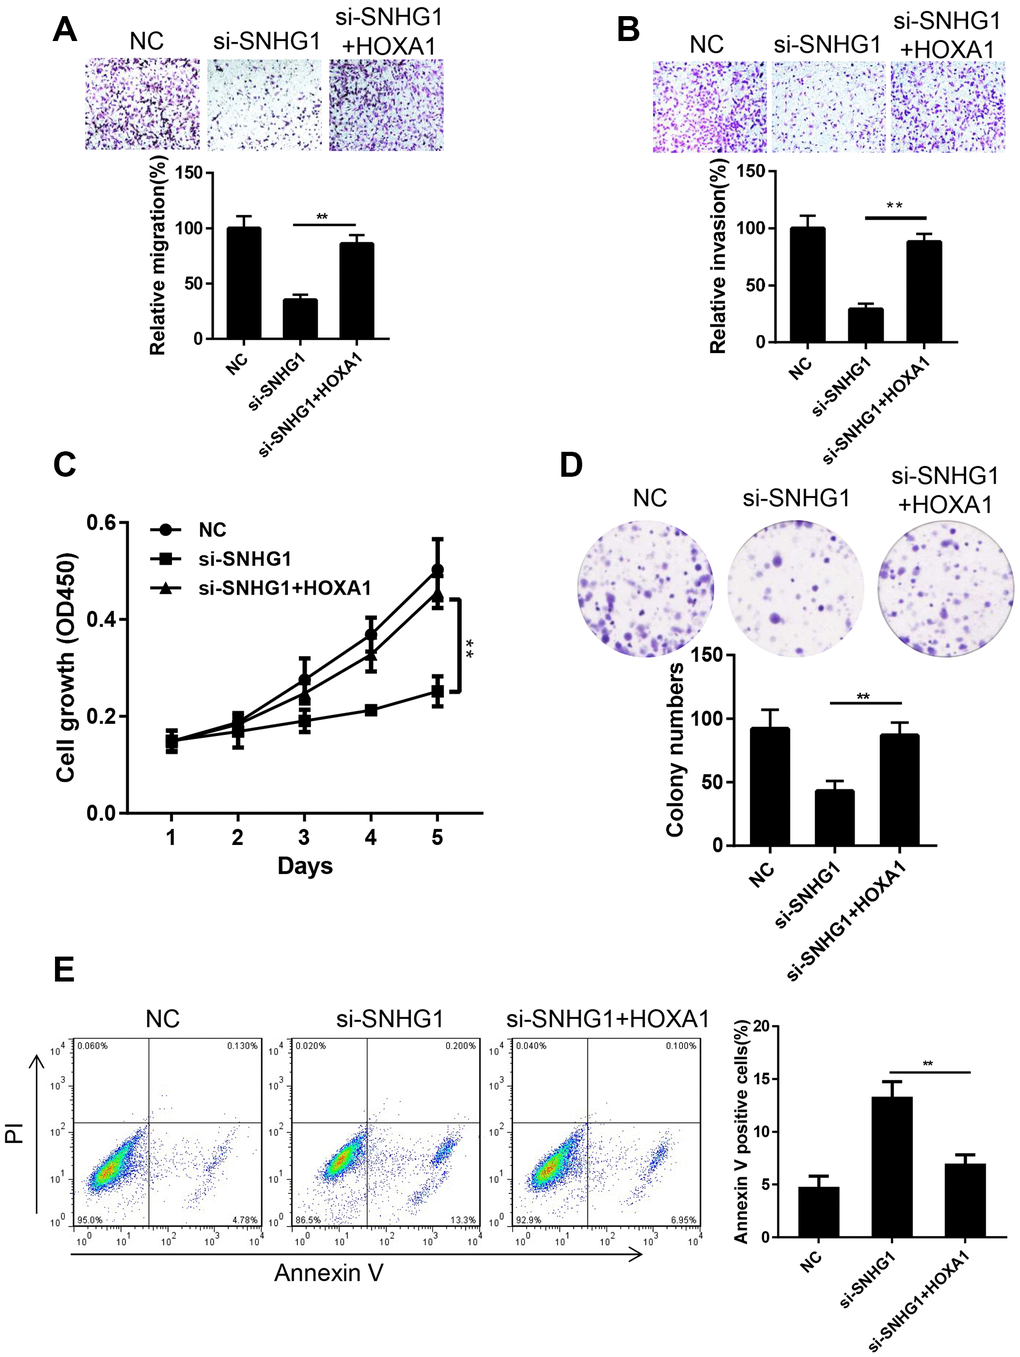 Ectopic expression of HOXA1 reversed the effect of SNHG1 silencing on MDA-MB-231 cells. (A, B) Migration (A) and invasion (B) of MDA-MB-231 cells transfected with NC, si-SNHG1 and si-SNHG1+HOXA1 were examined by transwell assay. Representative images of the cells migrated or invaded to the lower chamber side (top panel). Cell migration and invasion capacities were shown as a percentage of NC control (bottom panel). **pC, D) Proliferation of MDA-MB-231 cells transfected with NC, si-SNHG1 and si-SNHG1+HOXA1 was examined by CCK-8 assay (C) and colony formation assay (D). (E) Apoptosis of MDA-MB-231 cells transfected with NC, si-SNHG1 and si-SNHG1+HOXA1 was measured using flow cytometry. **p